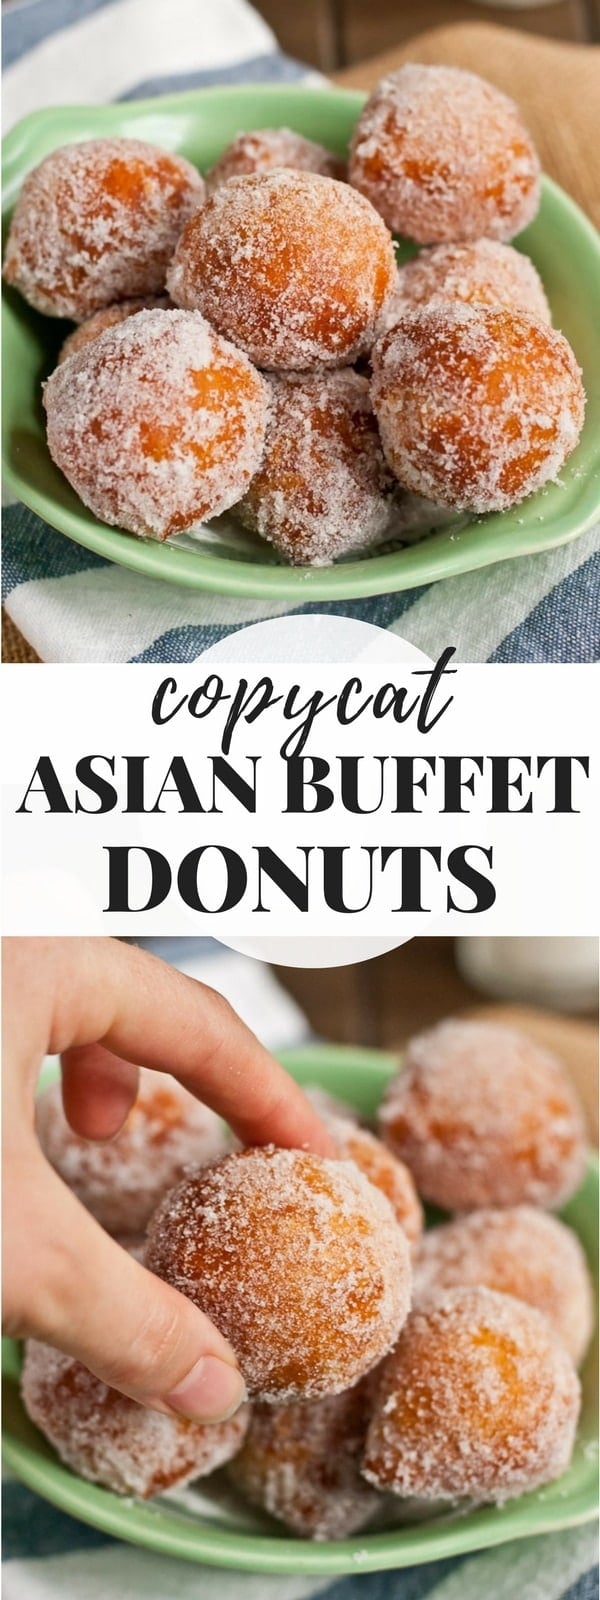 Sugar coated biscuit donuts in a bowl